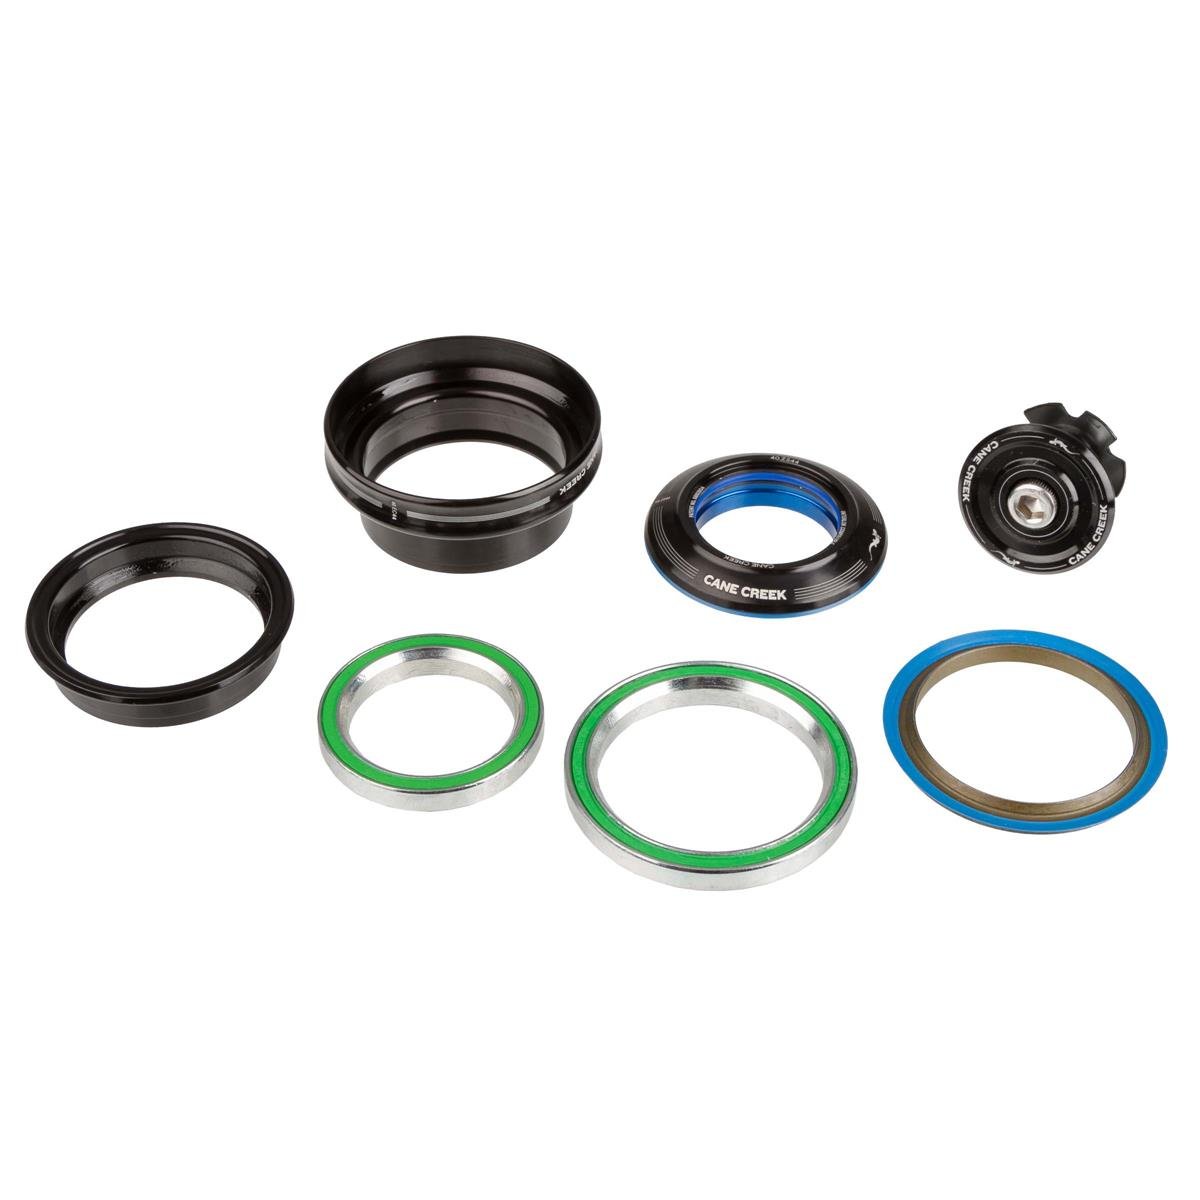 Cane Creek Headset 40 ZS44/28.6 | EC44/40, Tapered